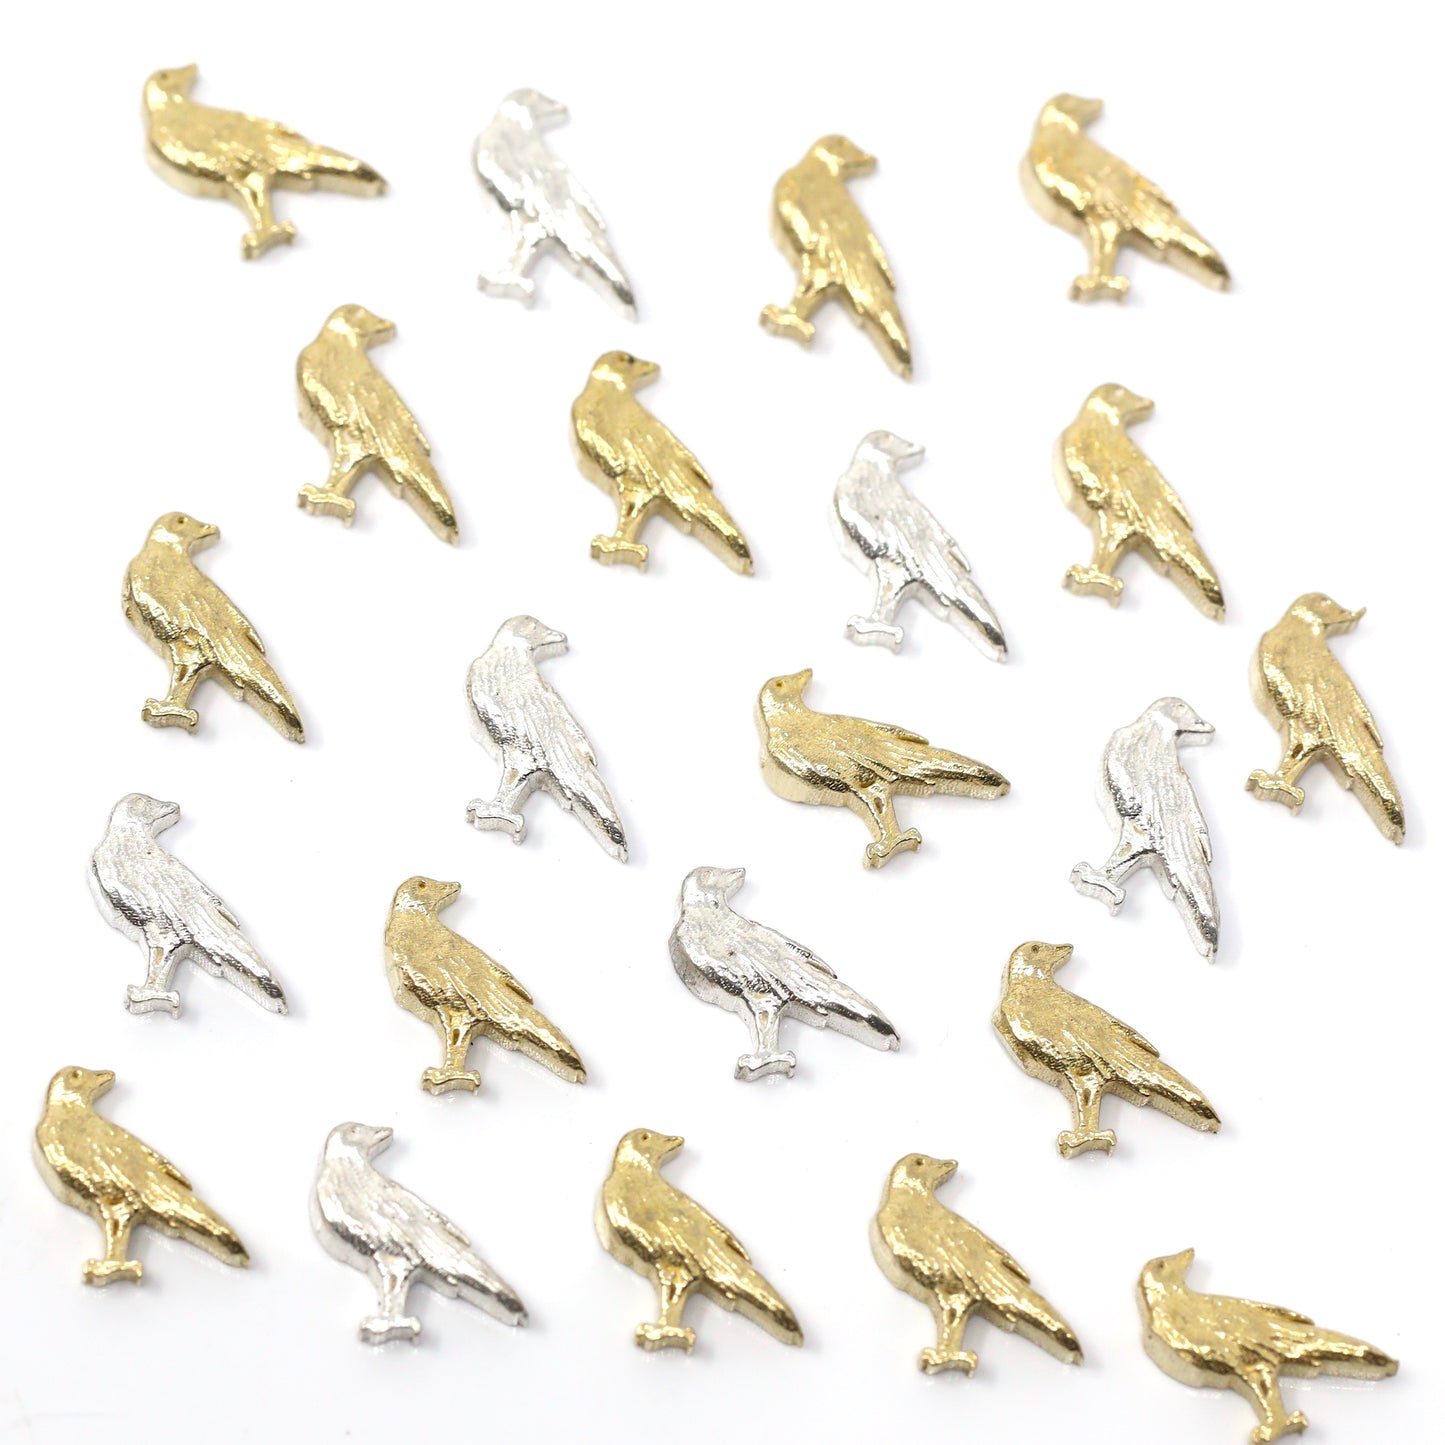 Raven Bird Accent Charm Embellishments for Soldering or Jewelry Making